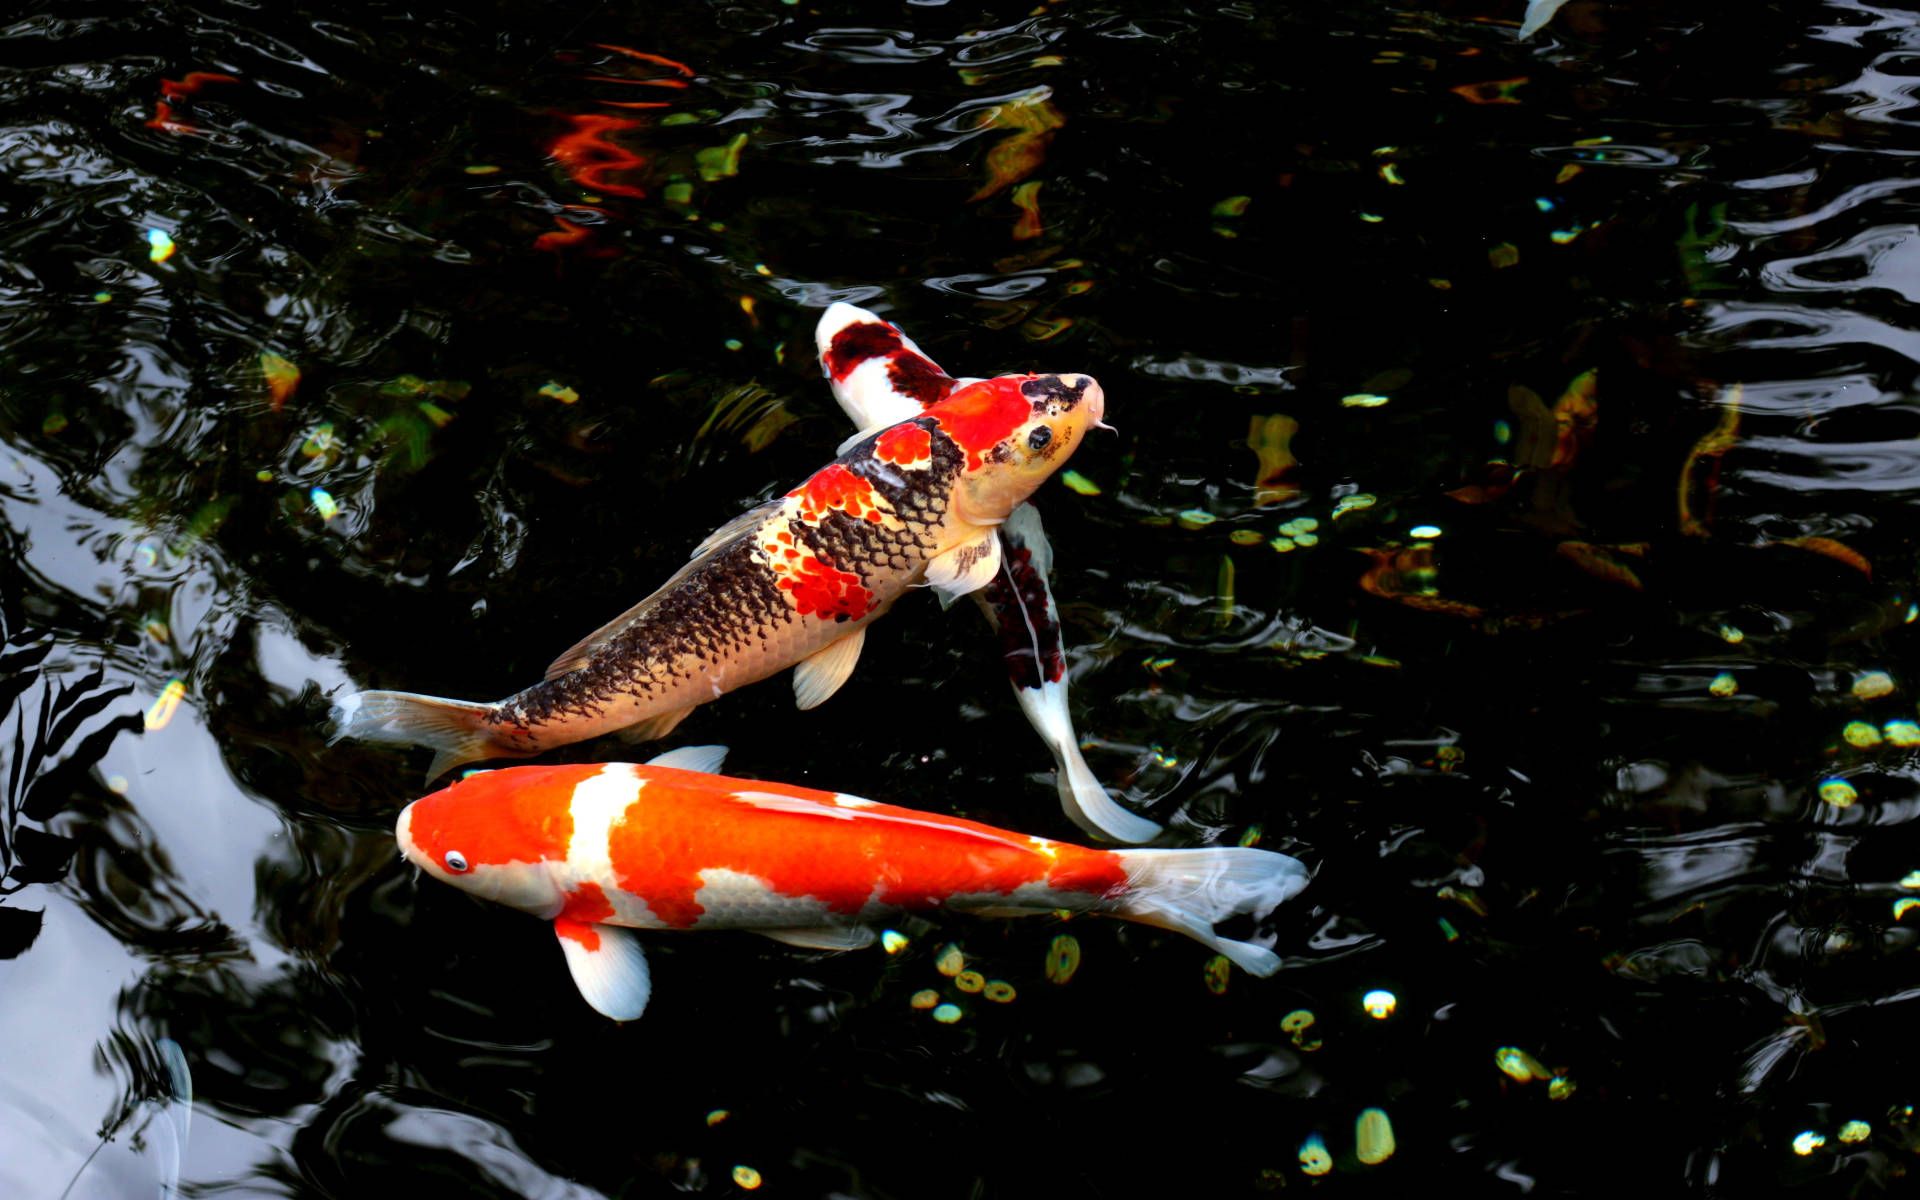 A couple of fish swimming in the water - Koi fish